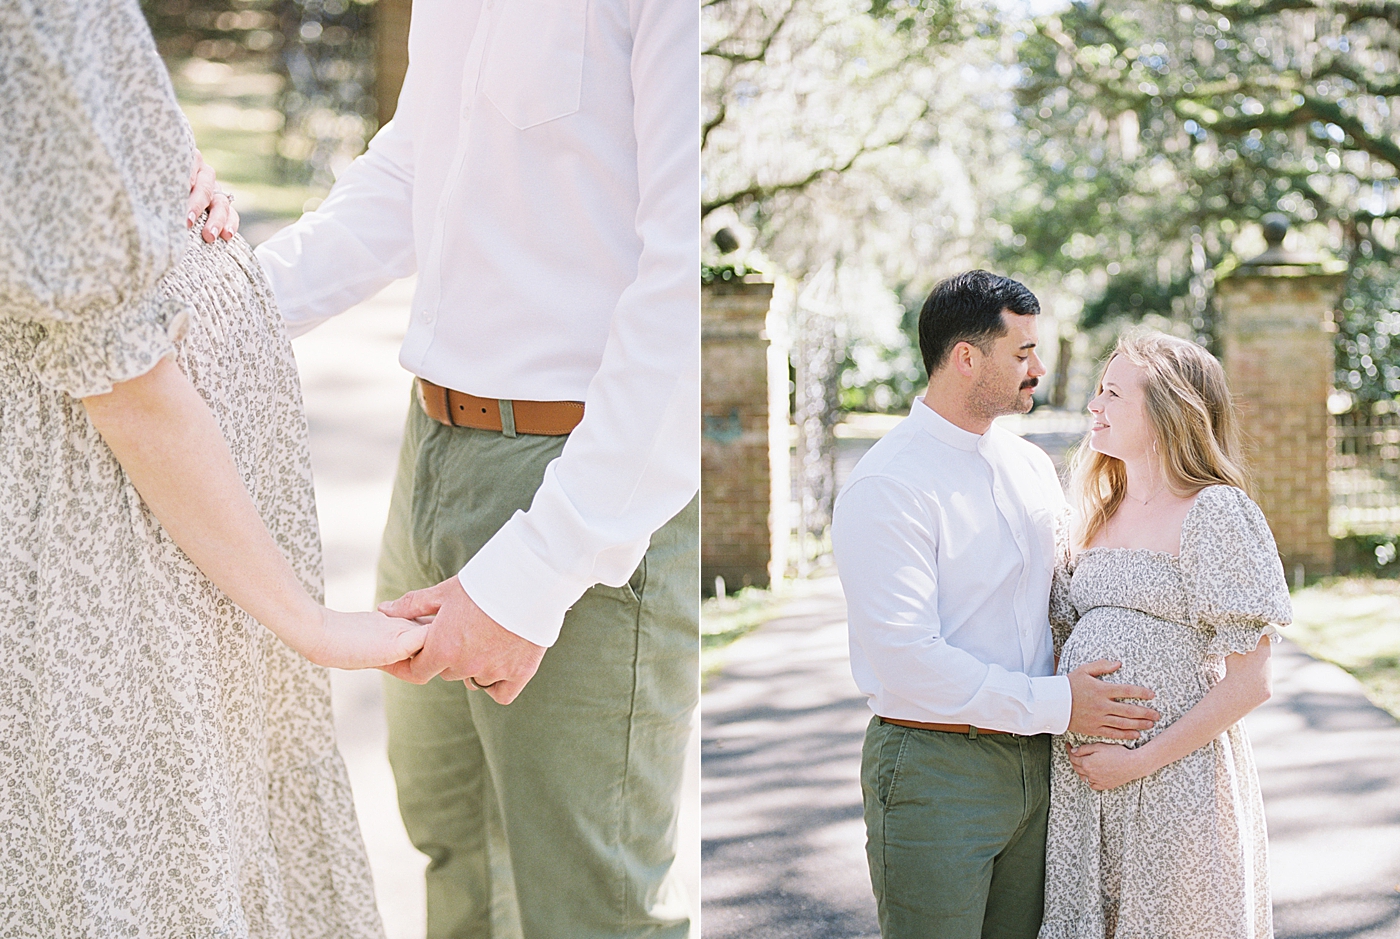 Side-by-side images of details of husband woman in a spring dress holding her hands and pregnant belly on an oak tree-lined walkway | Image by Caitlyn Motycka Photography